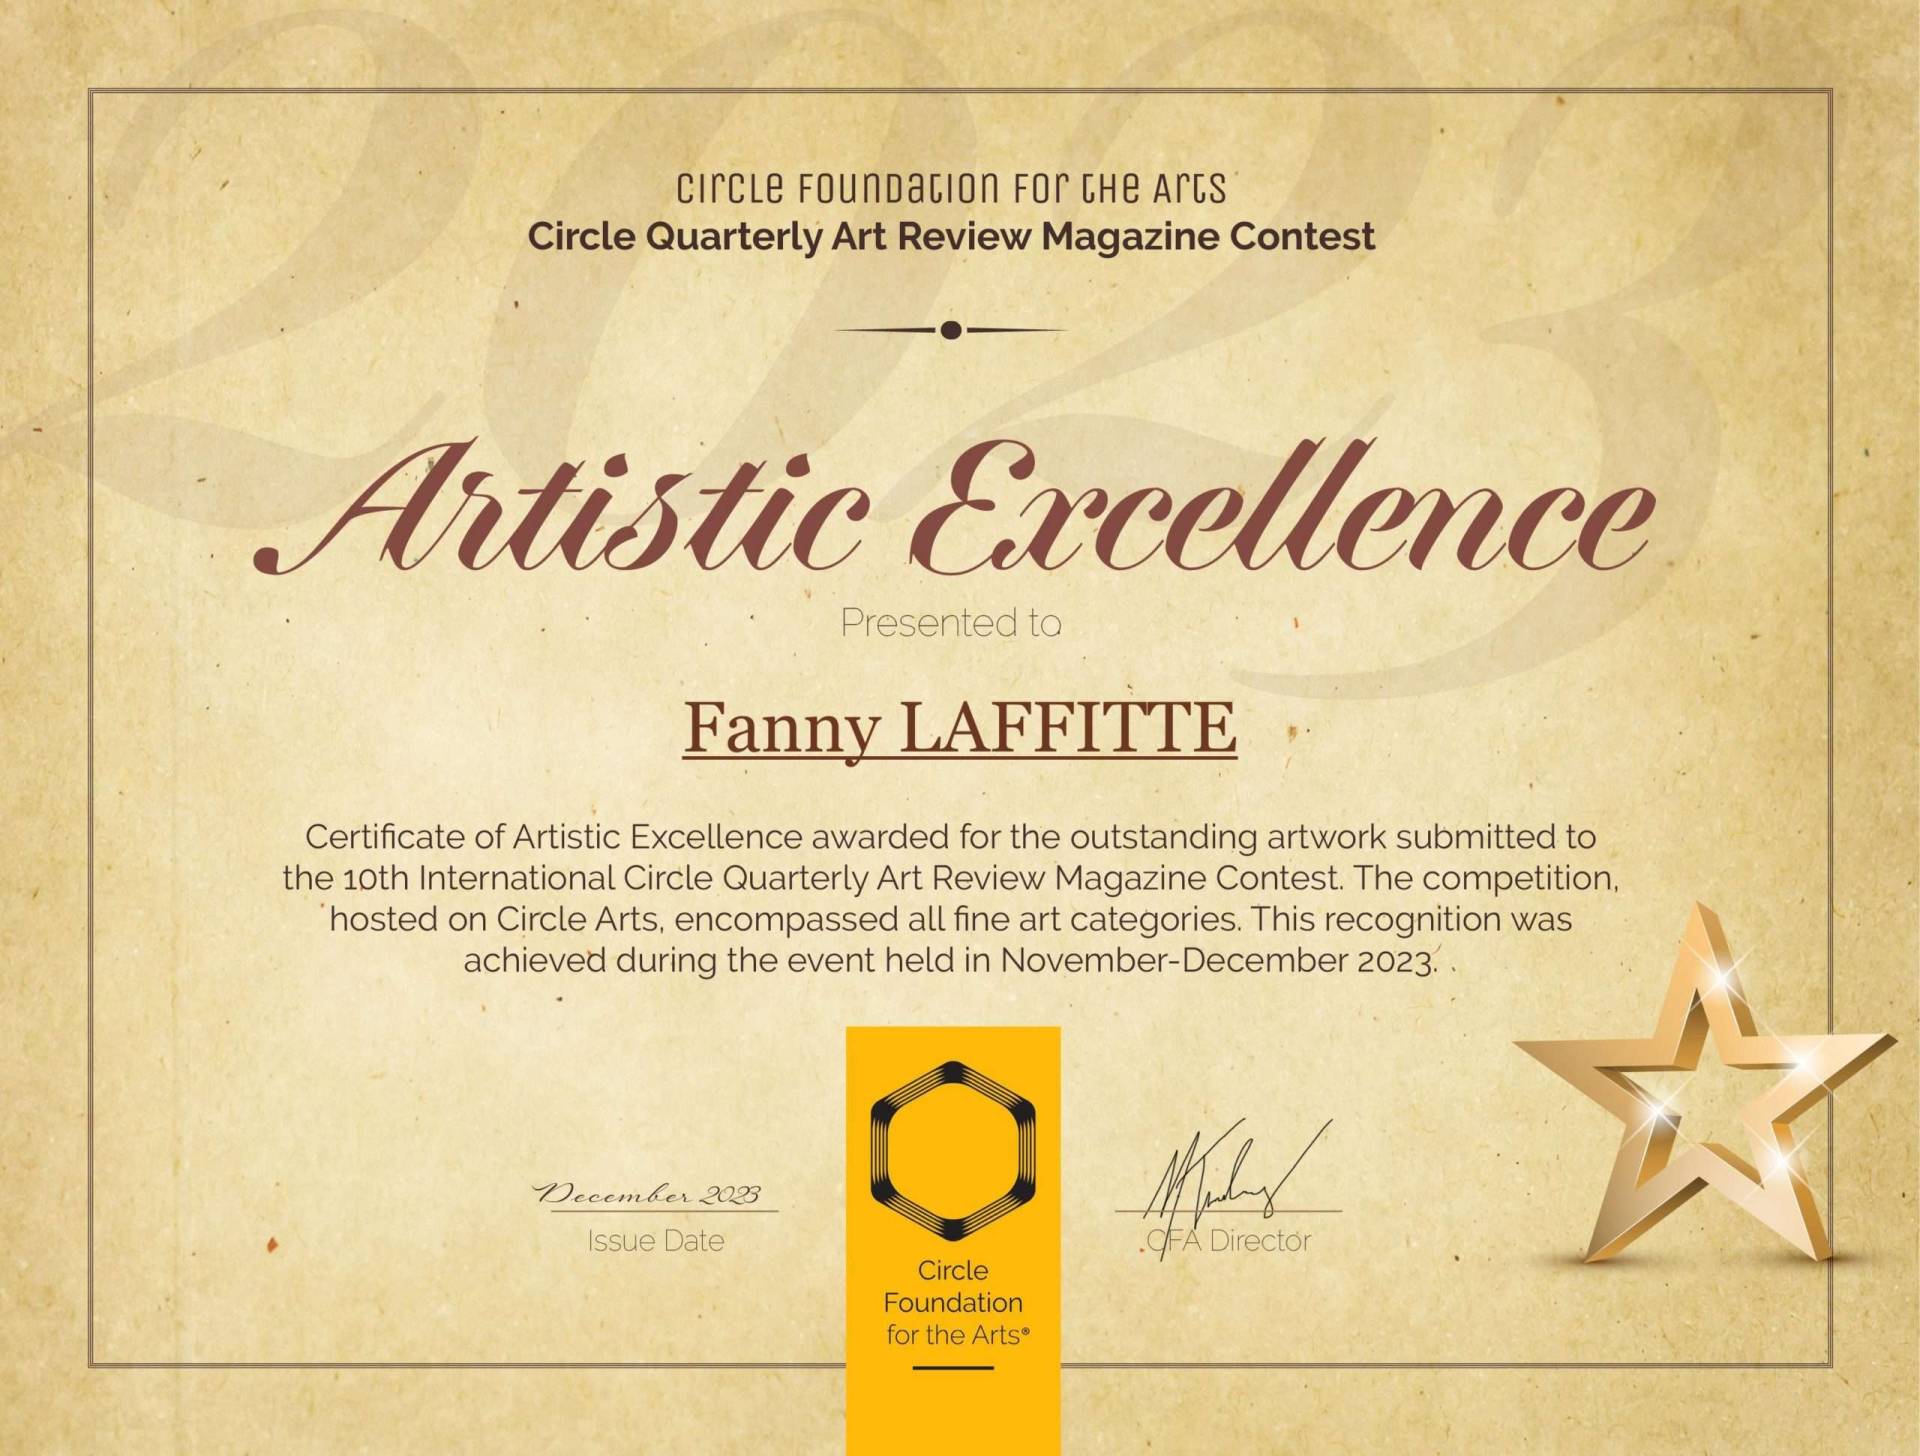 Certificat d’excellence artistique (Circle Foundation for the arts)